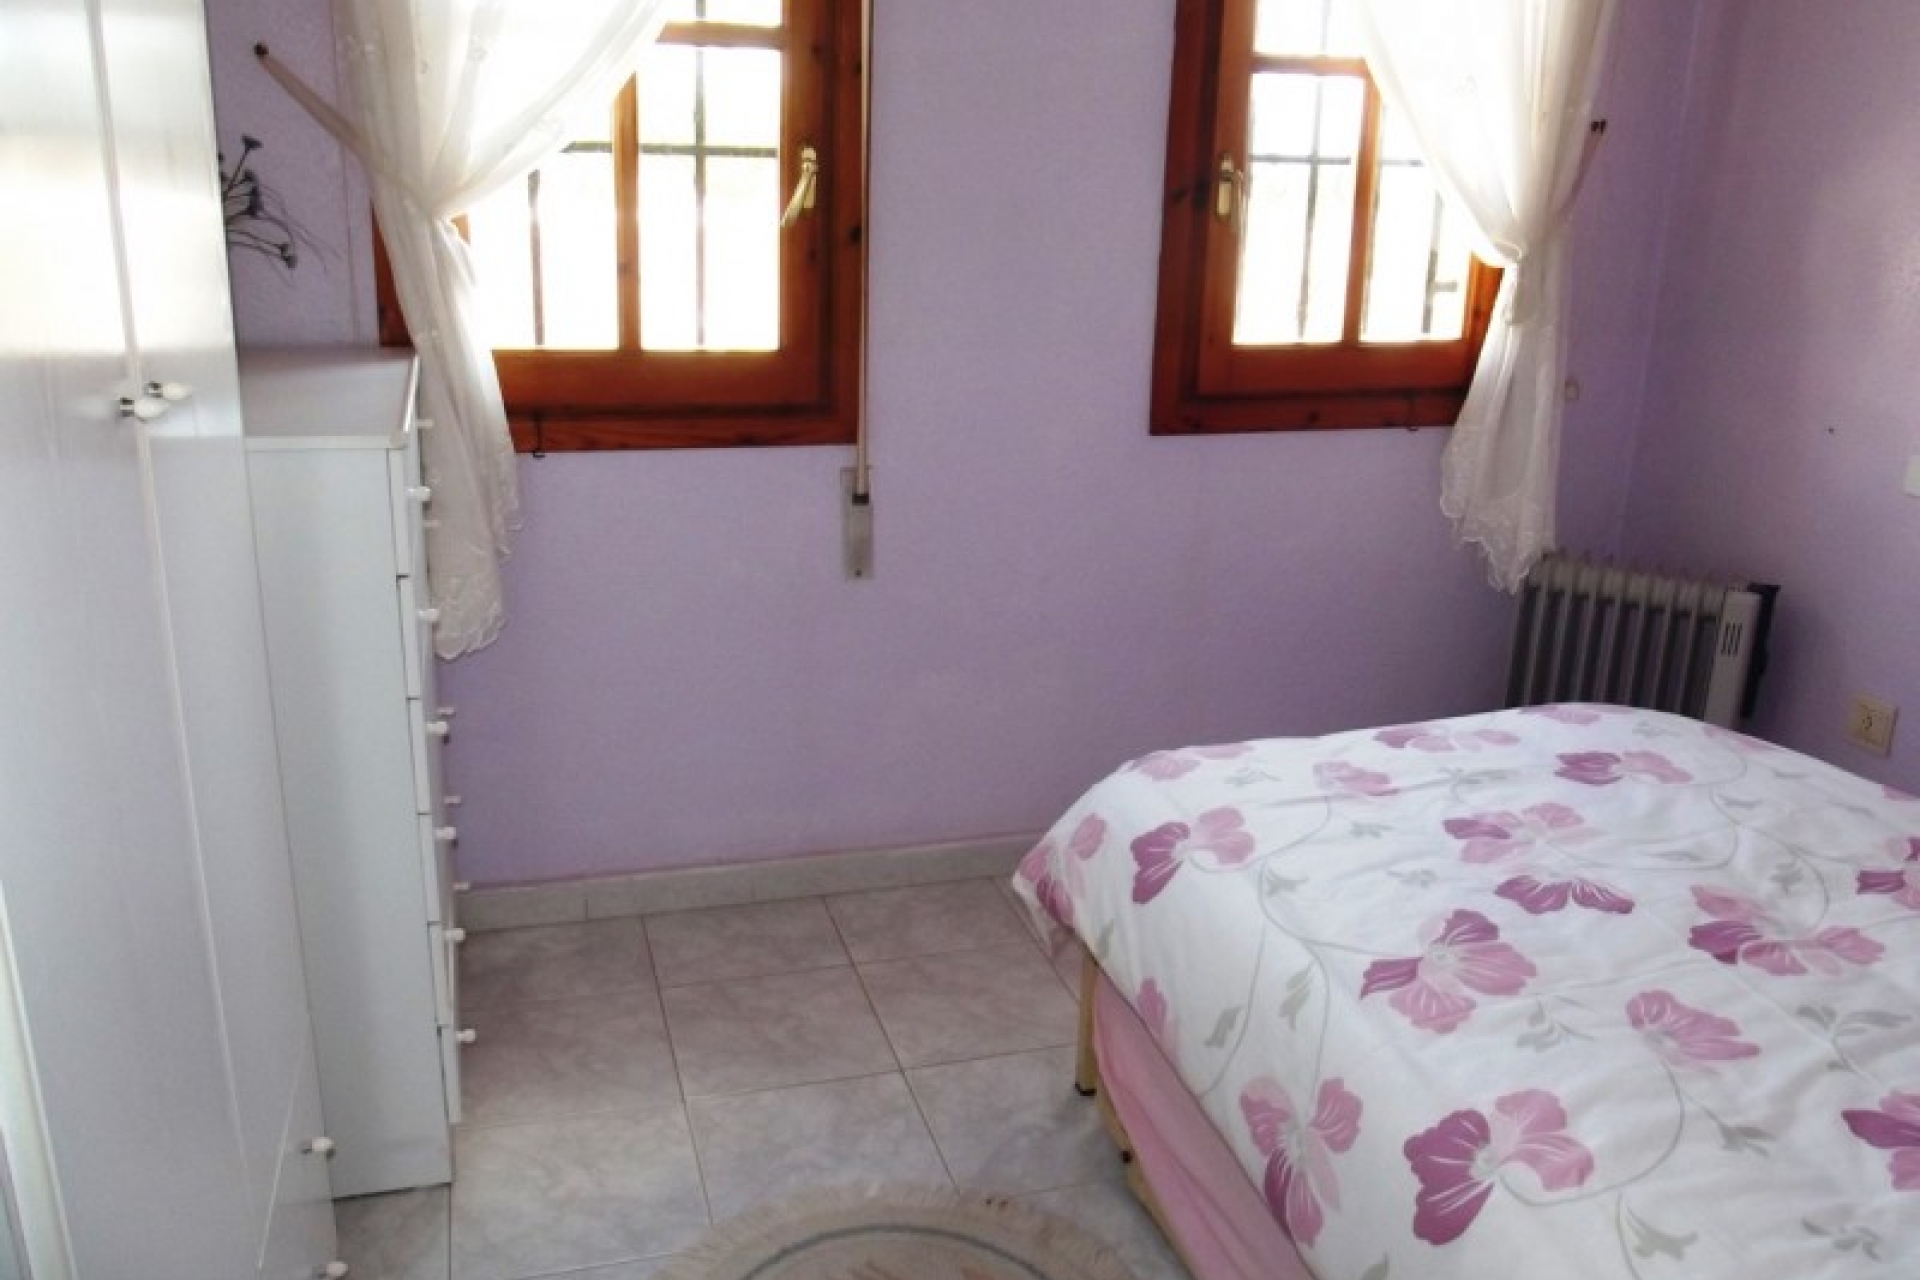 Ciudad Quesada property for sale, for sale cheap bargain property in Quesada, property bargain forsale near Torrevieja cheap.